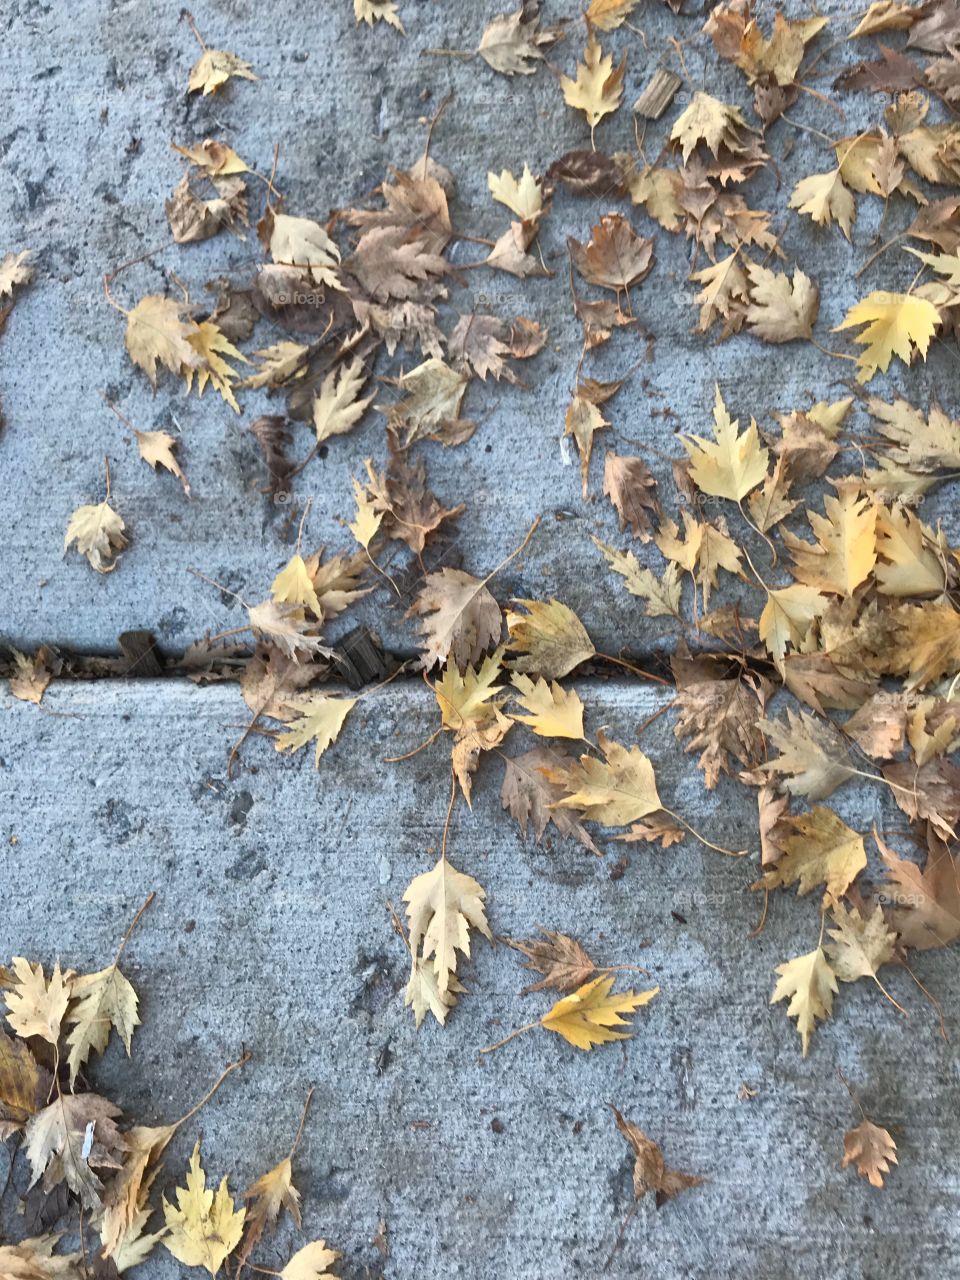 Abstract of fall leaves on a sidewalk with crack